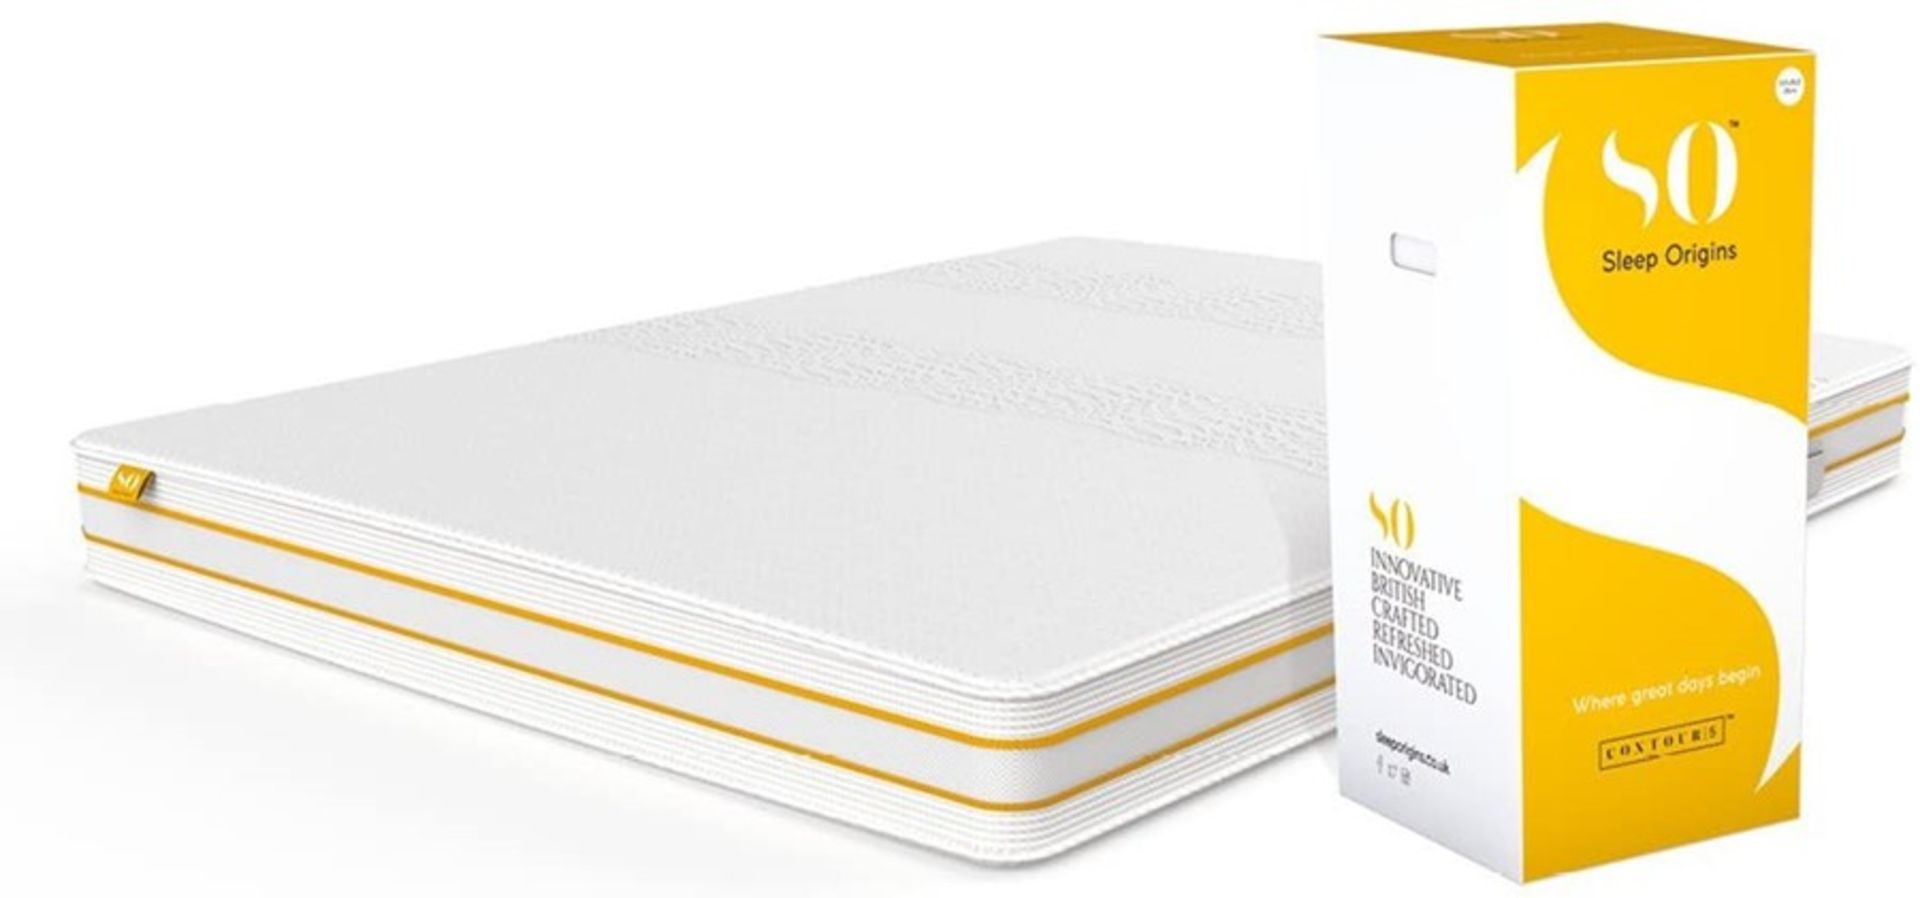 | 1X | SLEEP ORIGINS KING SIZE 25CM DEEP MATTRESS | NEW AND BOXED| NO ONLINE RESALE | RRP £659 |